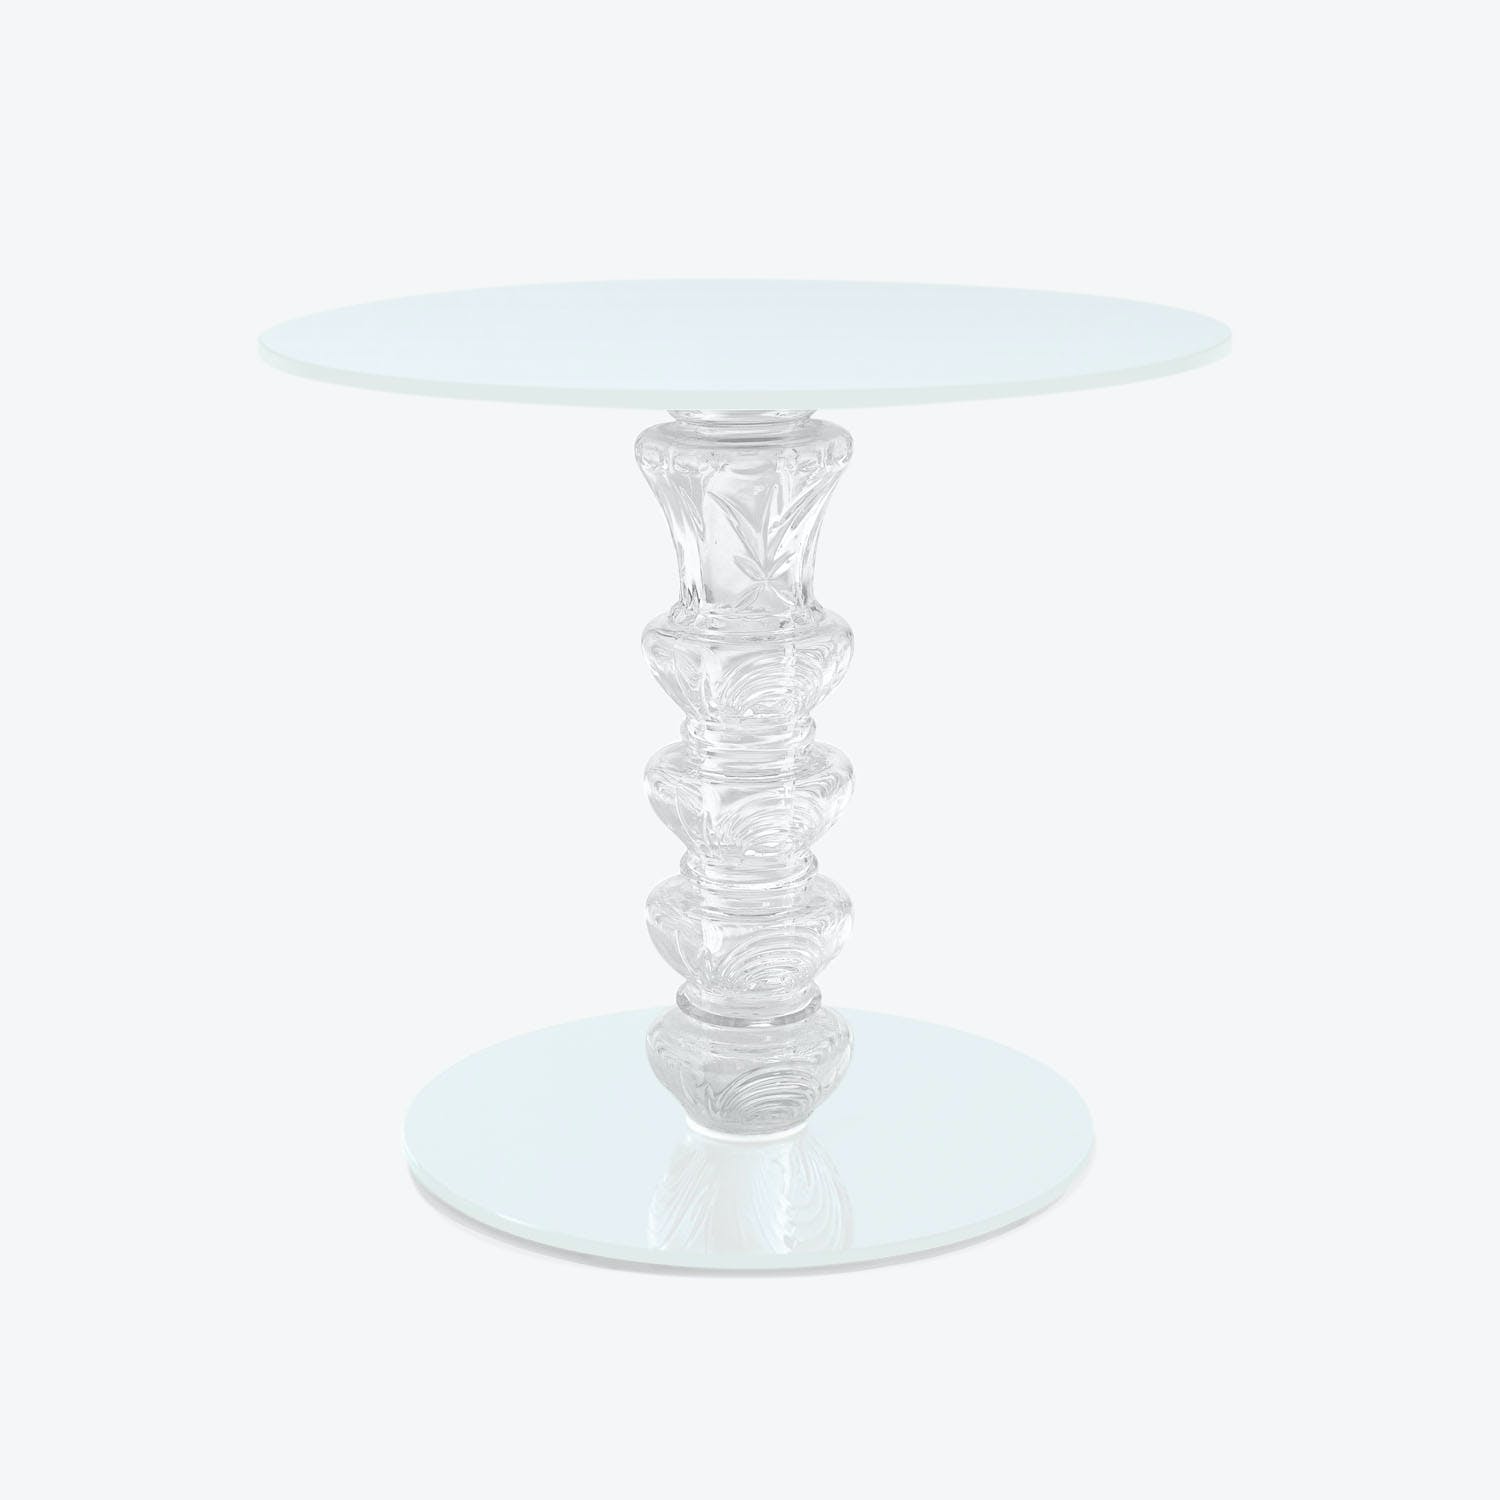 Minimalist glass table with frosted top and elegant sculpted base.